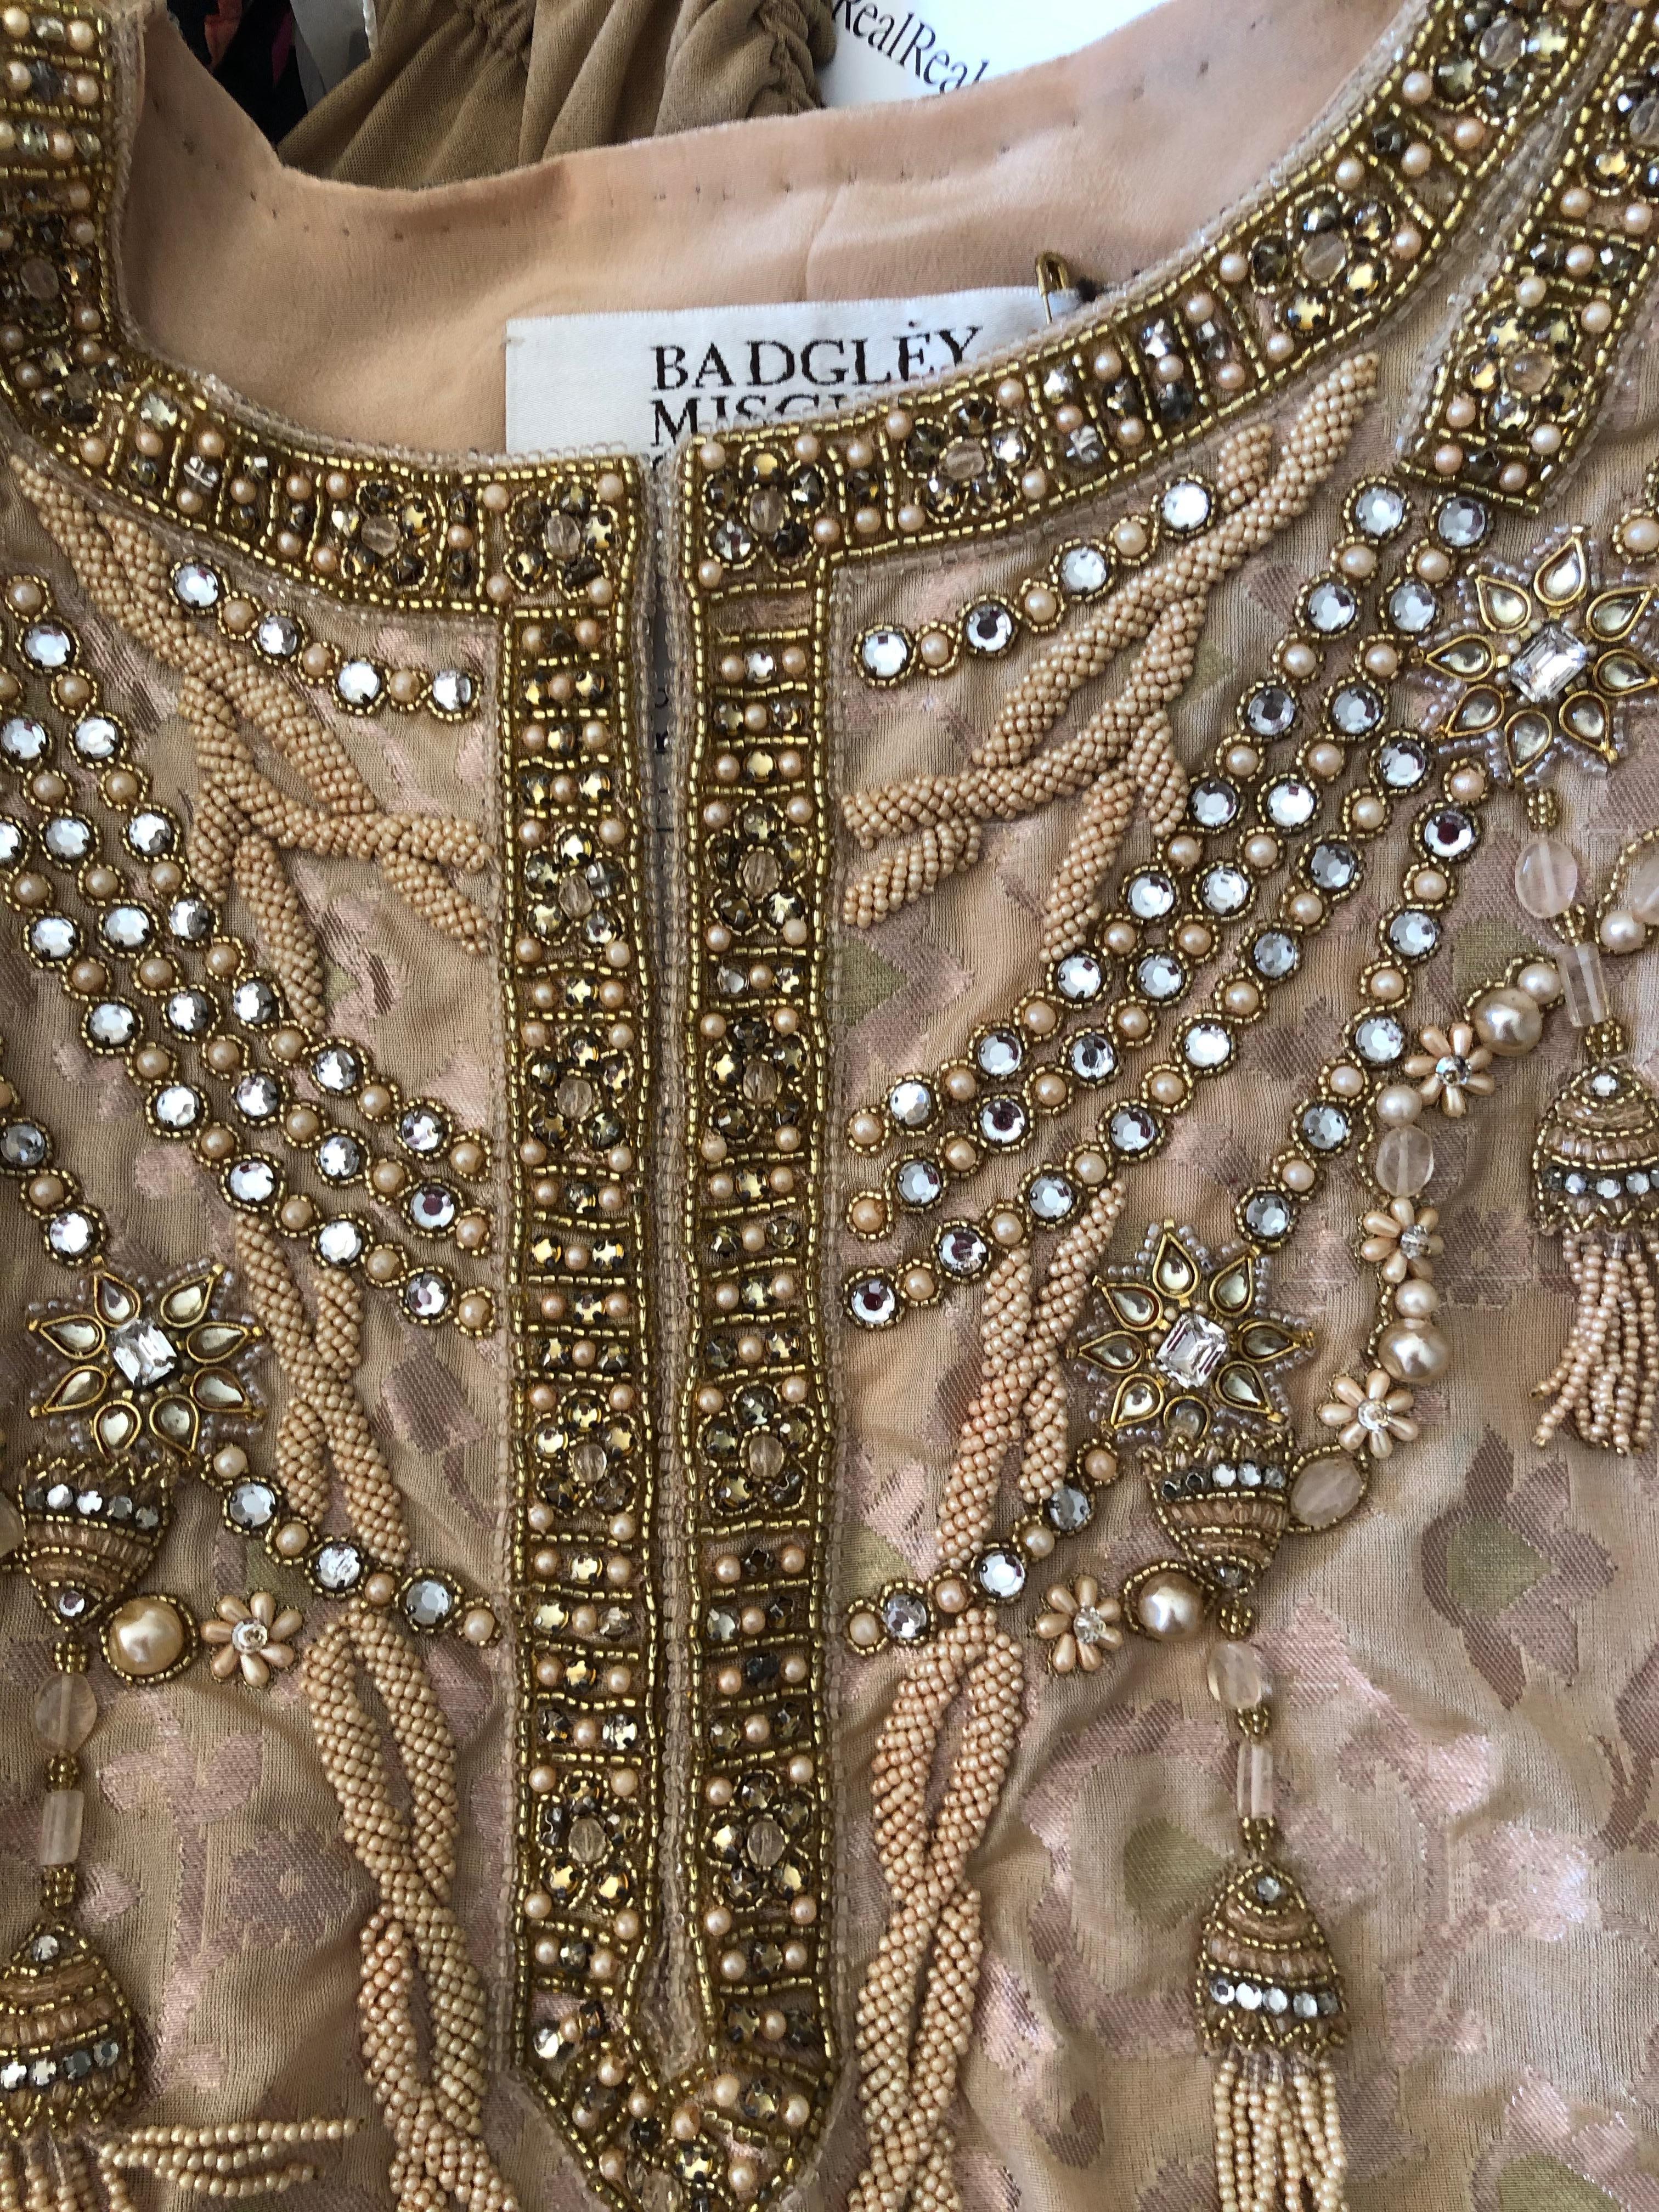 Badgley Mishka Couture Richly Jeweled & Pearl Embellished Gold Silk Caftan
Unworn with store tags
One Size
Bust 44